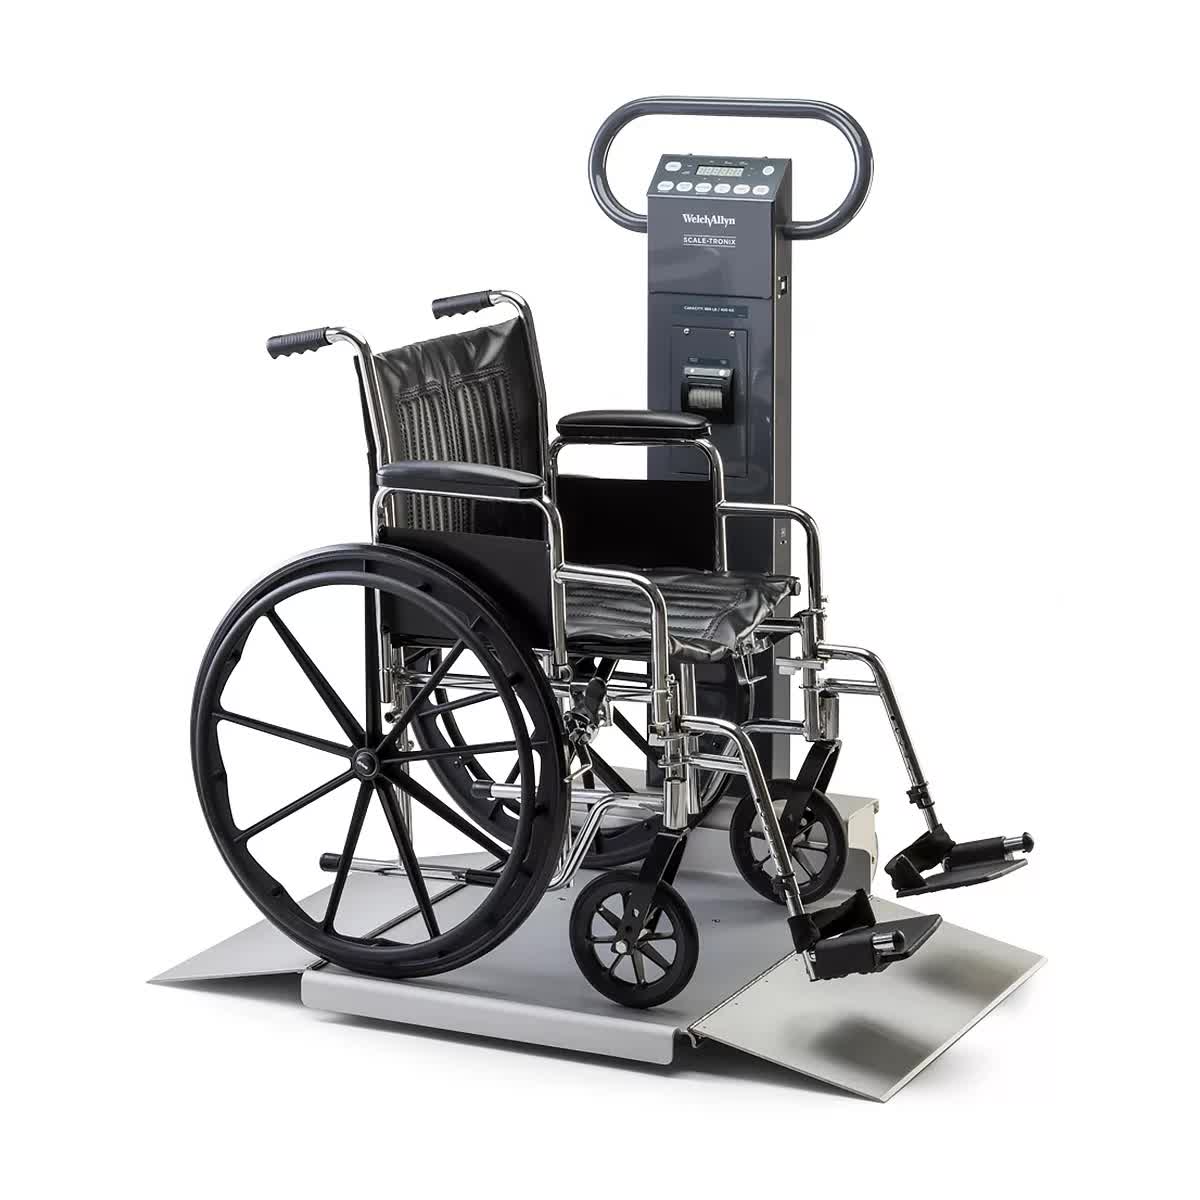 Welch Allyn Scale-Tronix 6702SP Oversized Wheelchair Scales with Standard Weight